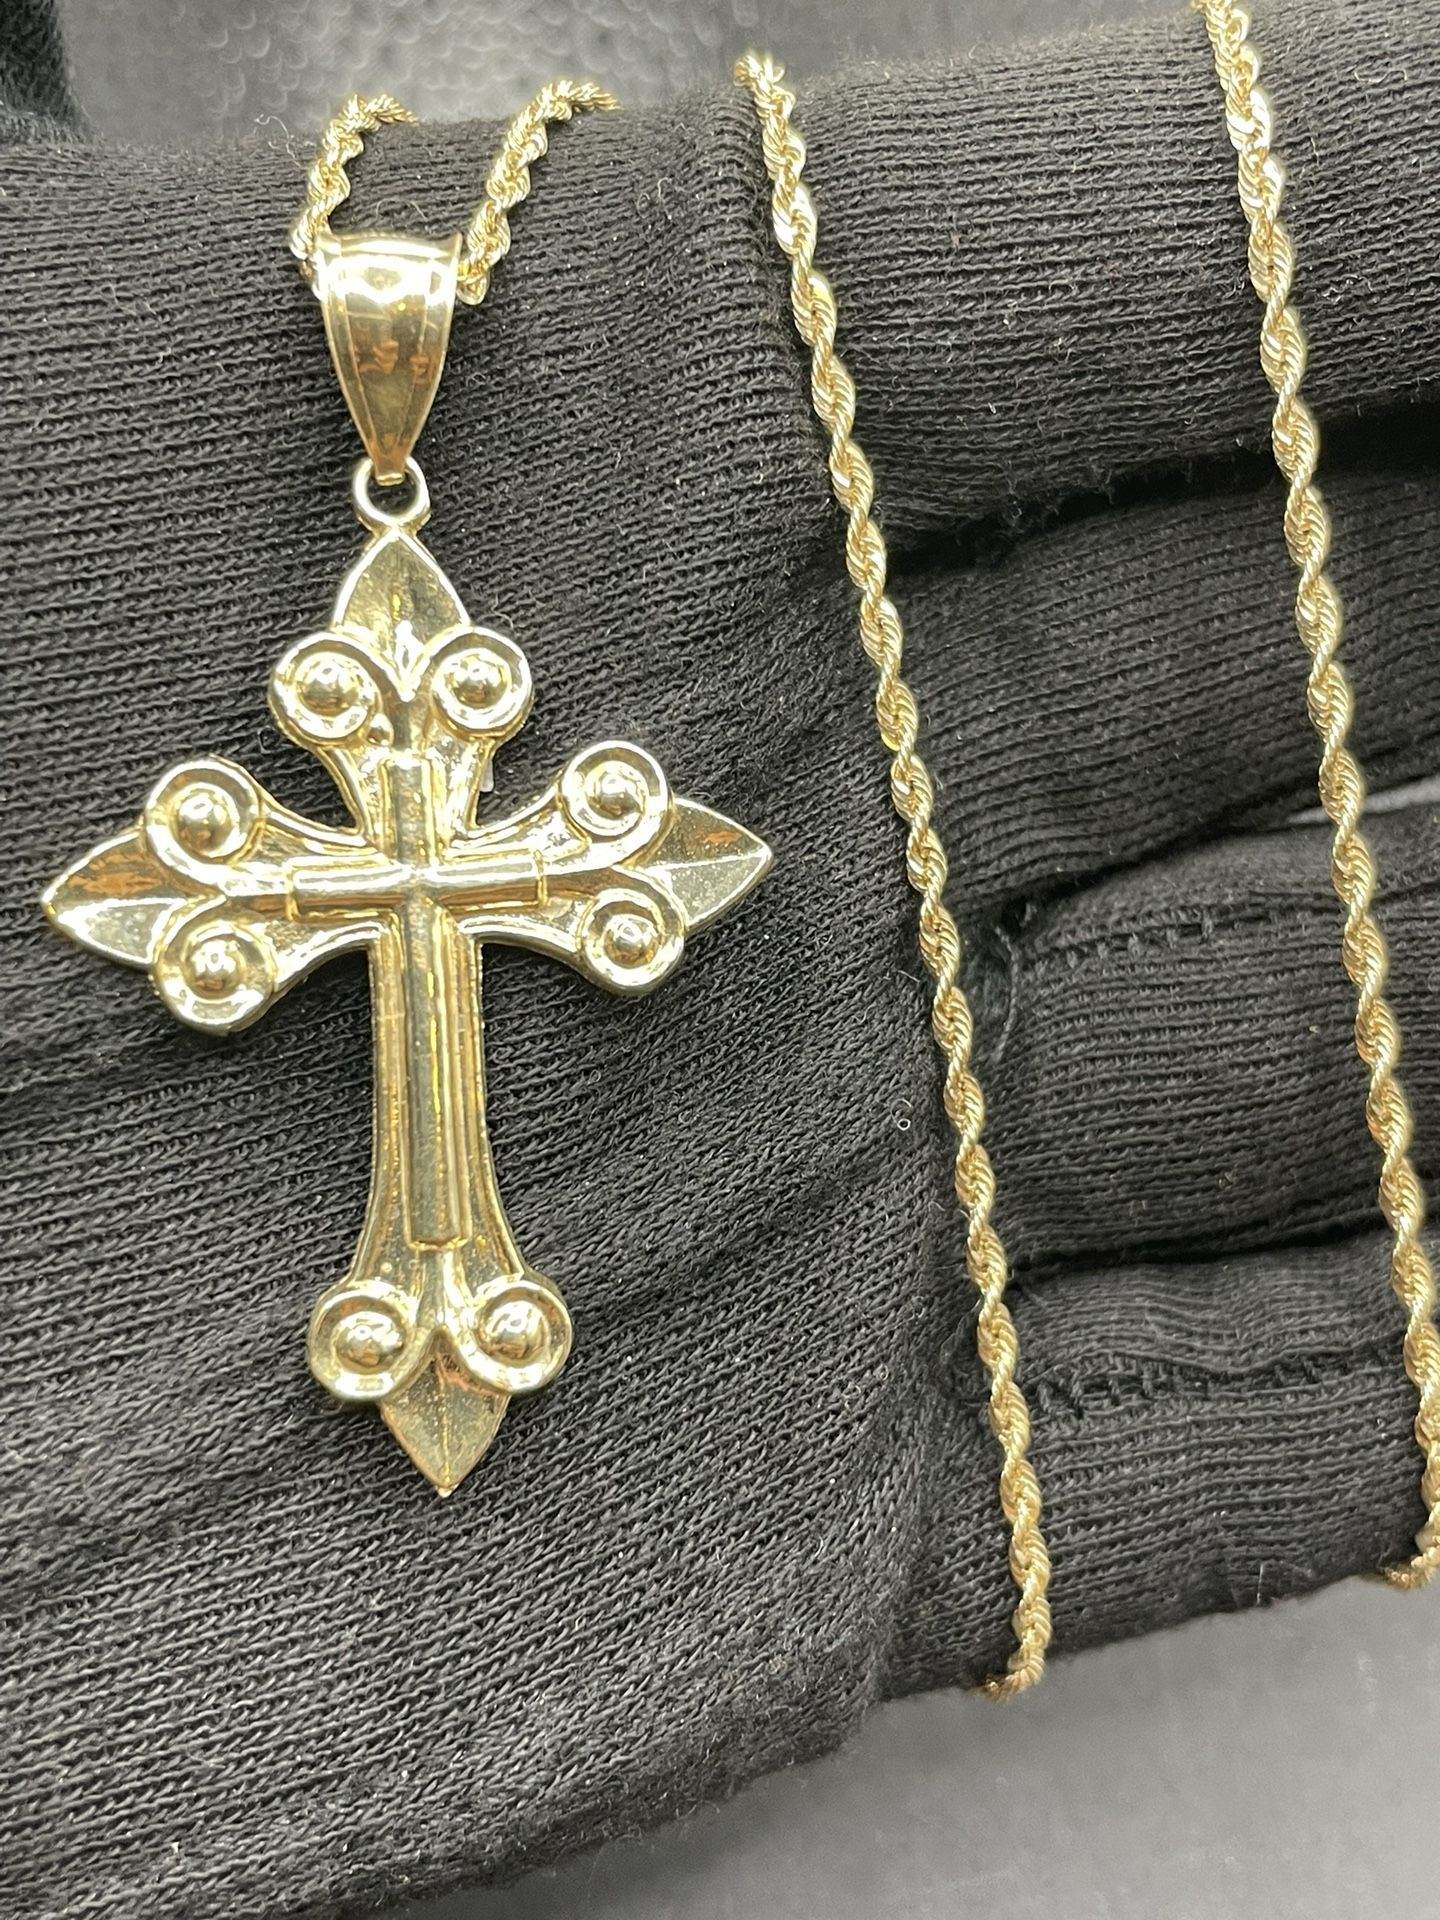 10K Gold Design Cross With 10K Gold Rope Chain